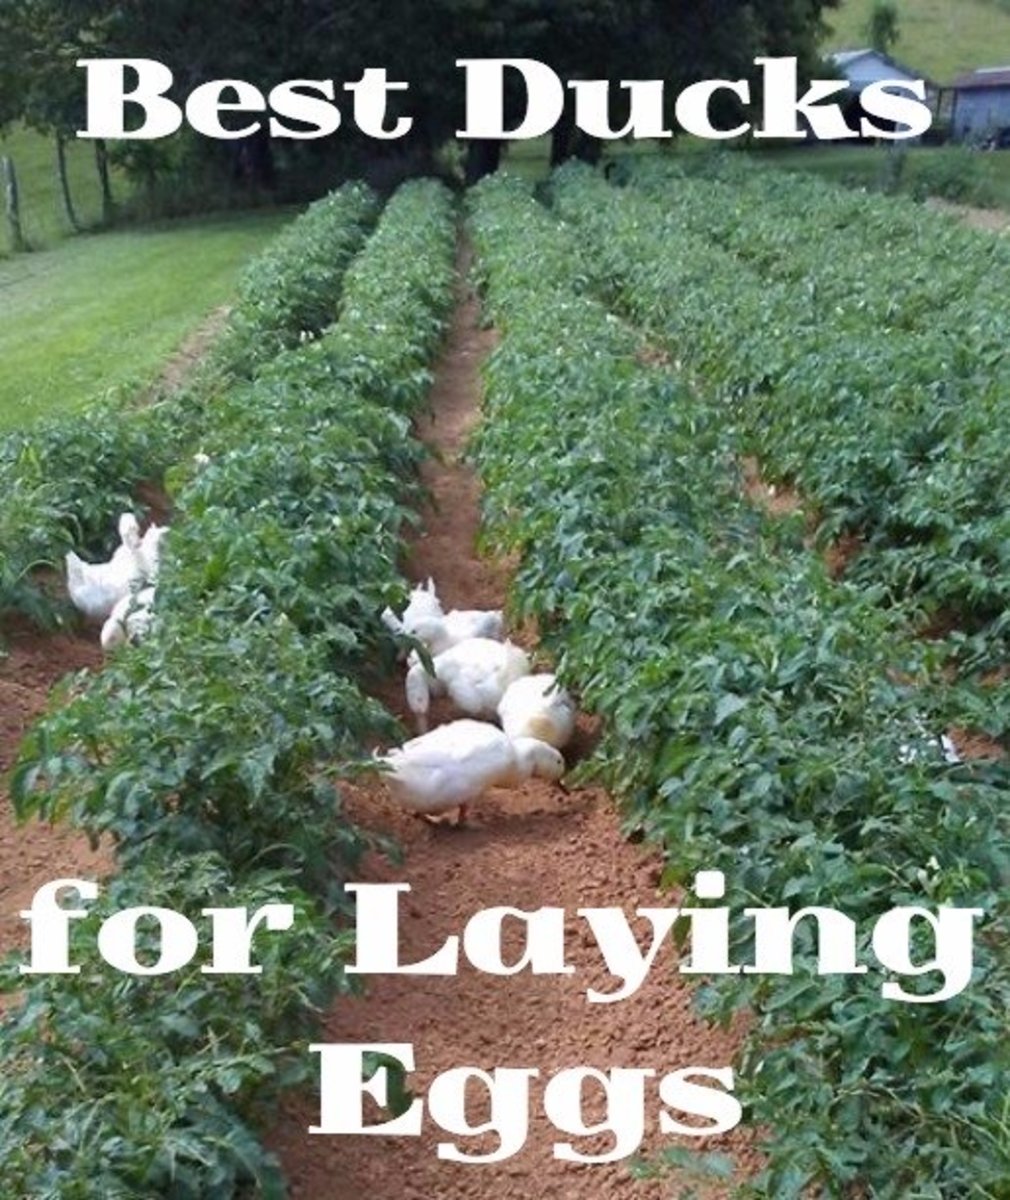 The Best Ducks for Laying Eggs